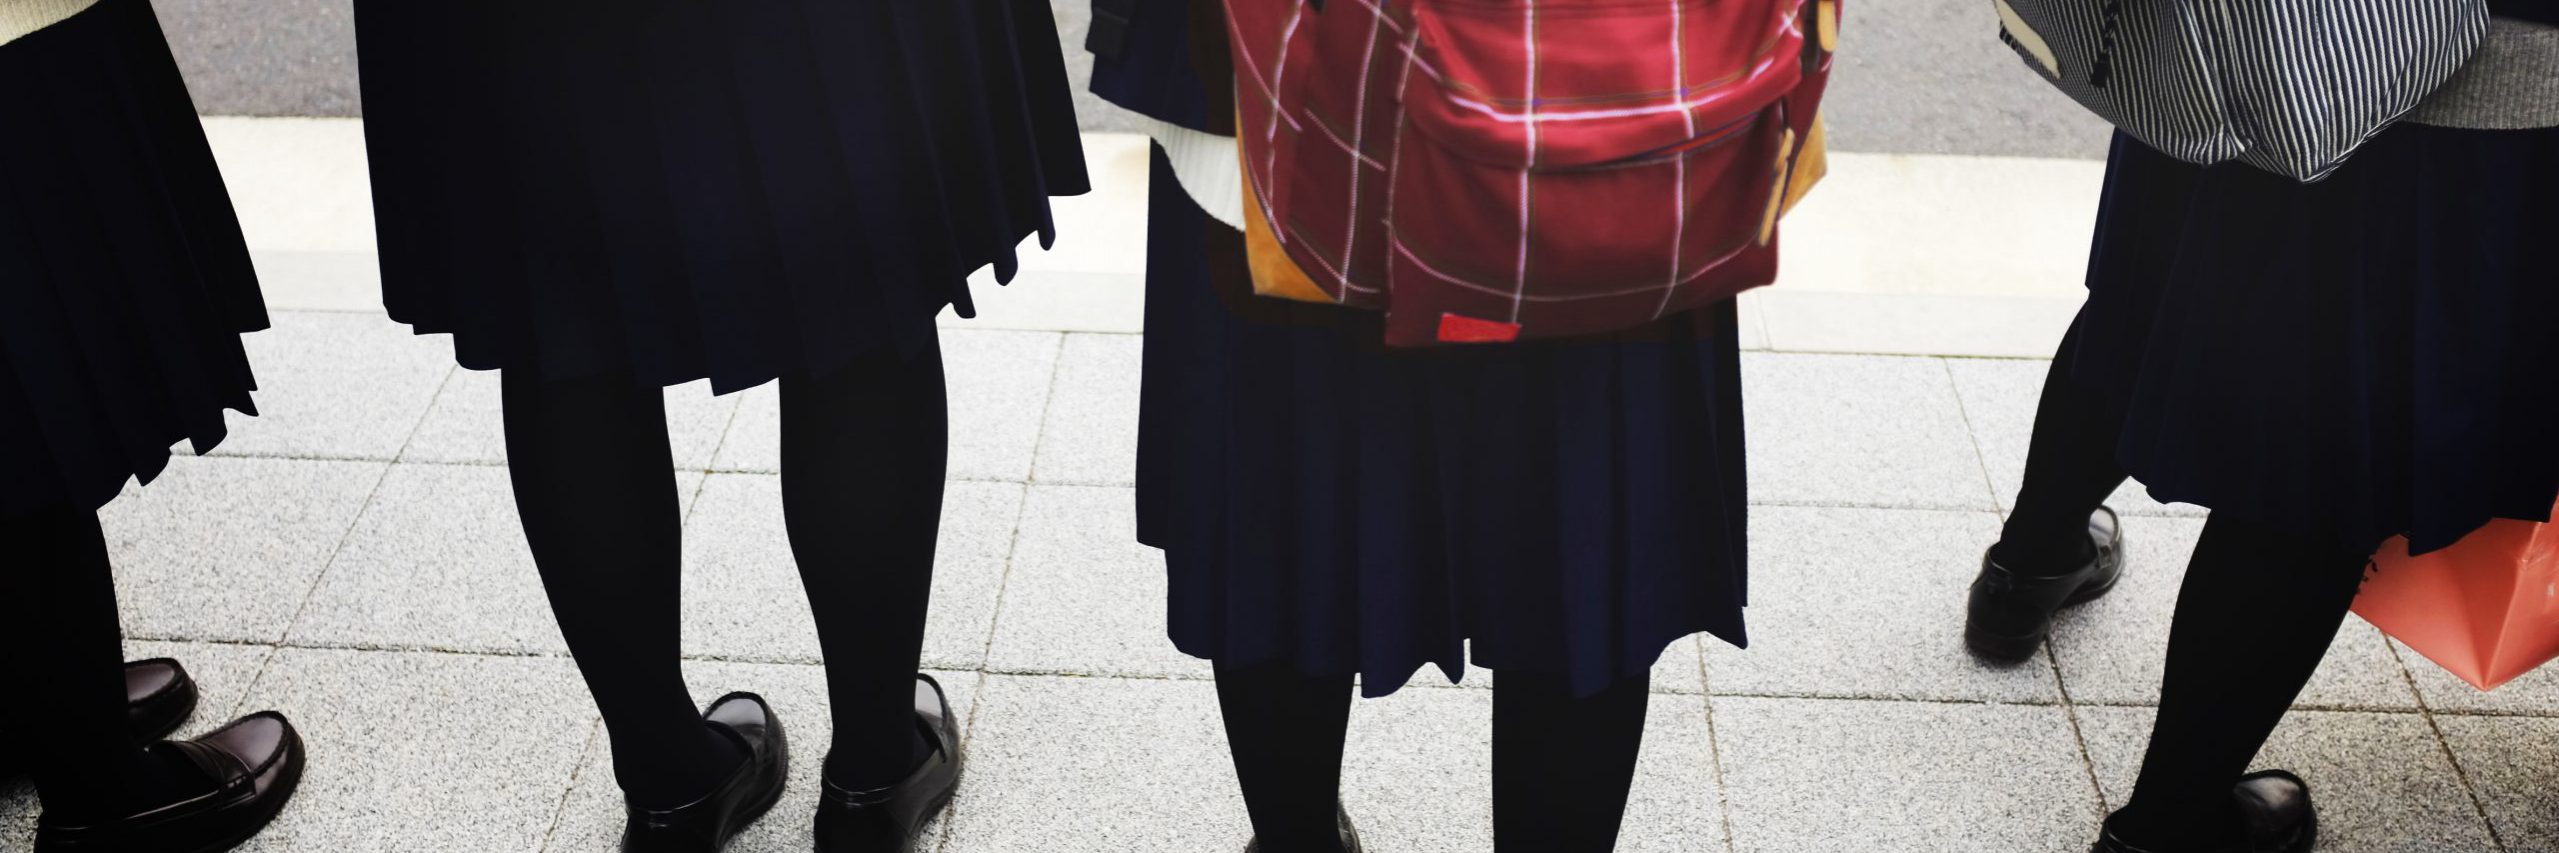 Students in school uniform with backpacks